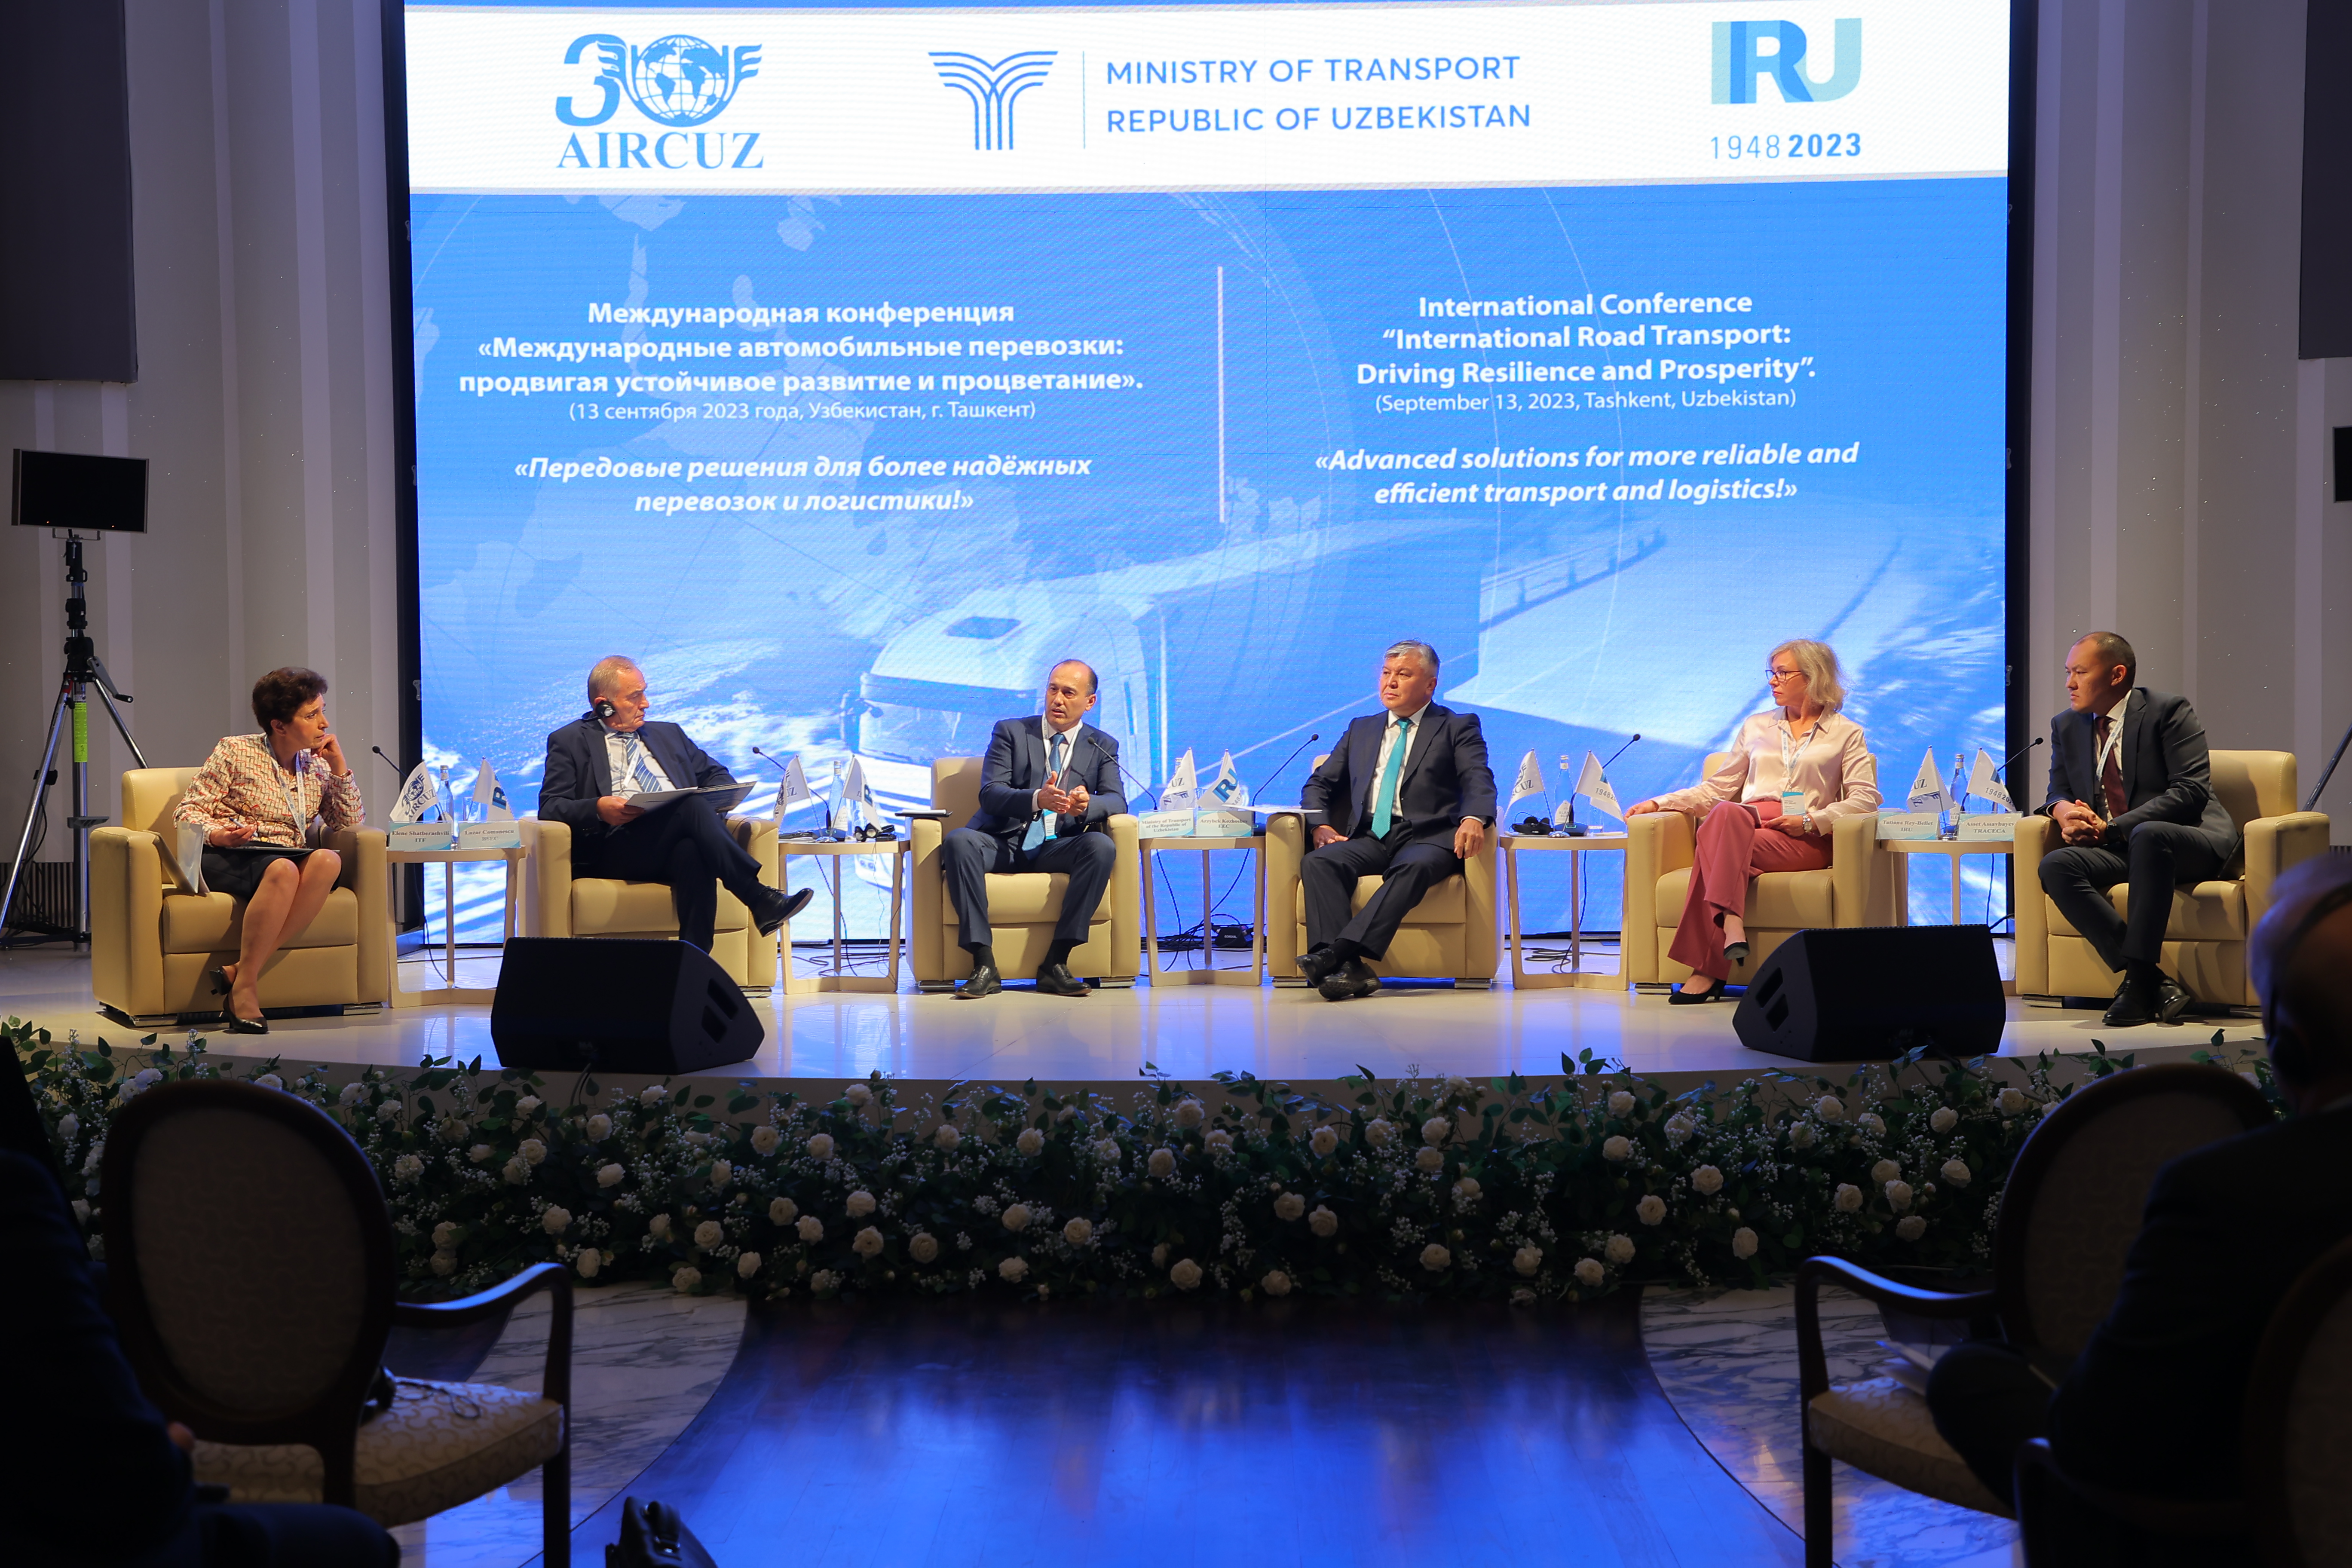 Driving resilience and prosperity in focus at Tashkent conference